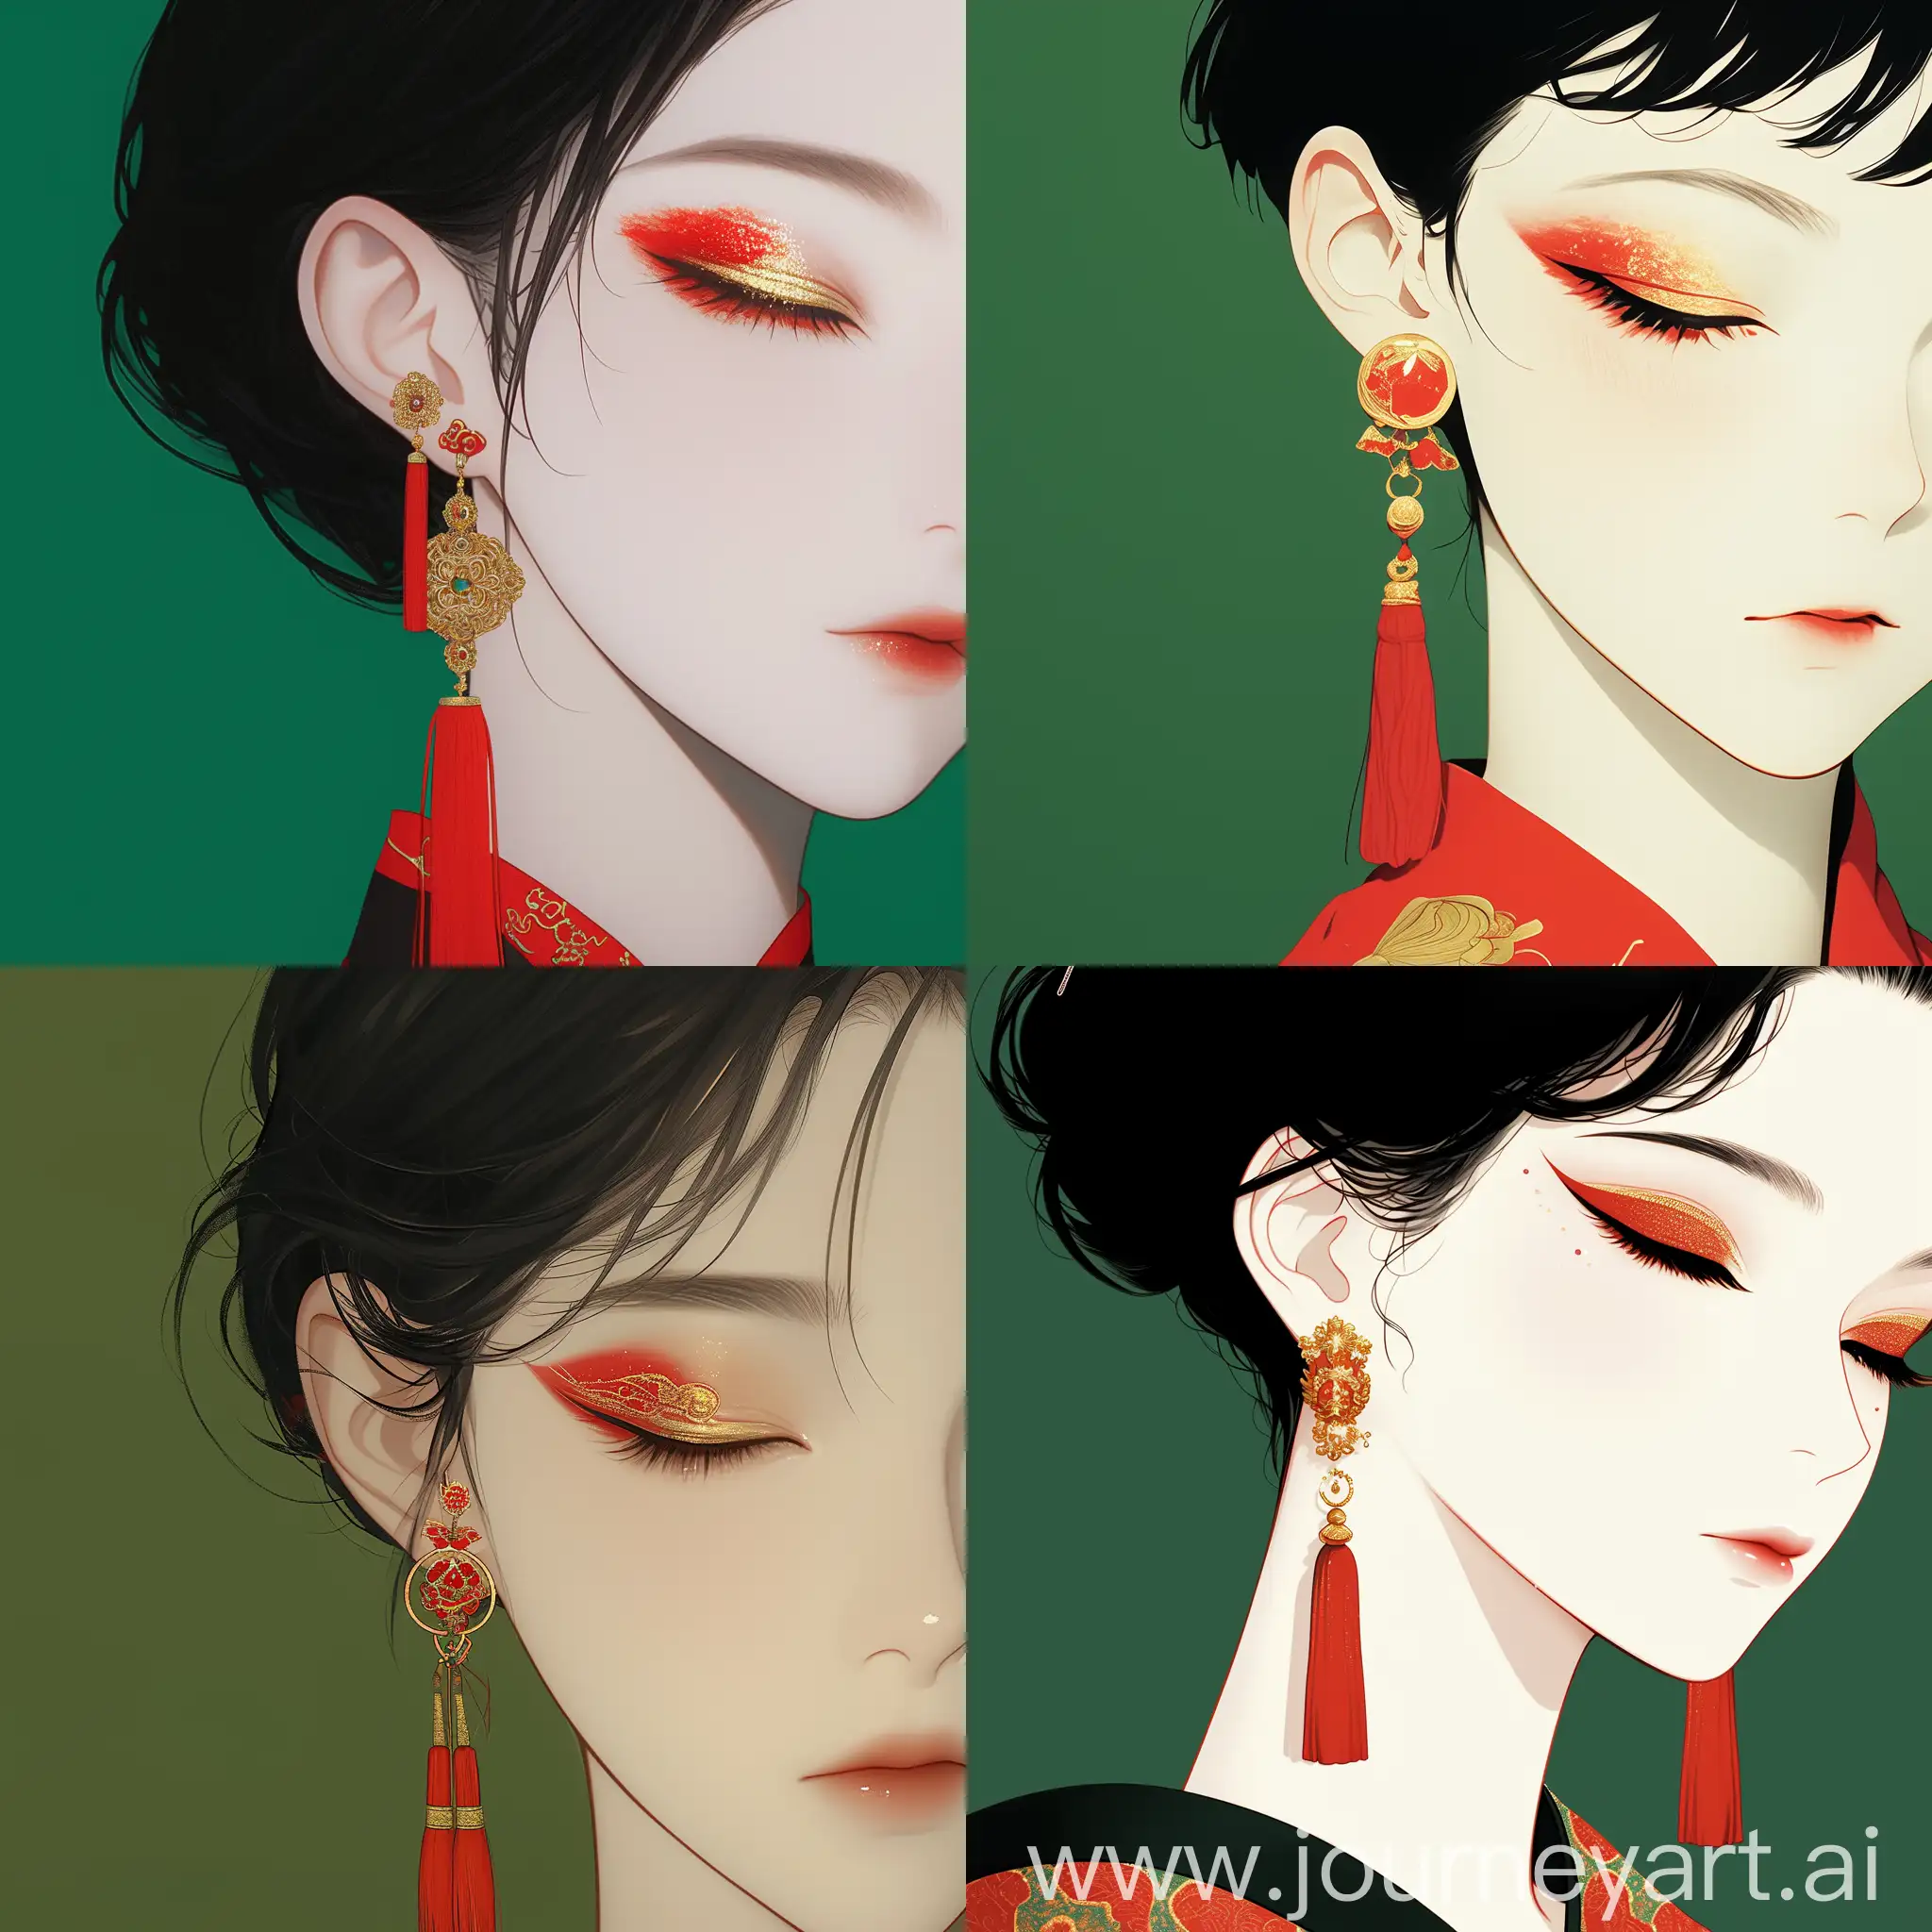 Theme: Beautiful anime girls, delicate face, closed eyes, red eye shadow, gold eyeliner, slender eyebrows, Red tassel earrings with gold pattern, black hair environment: green background, Contrast with women's attire Medium and Style: Classical Art Style, Emphasis on details and color Lighting and color: Highlight facial features and clothing details, Red and gold represent luxury, Green background for contrast. Point of view and composition: headshot., Focus on the woman's face and upper body, Simple background highlights the subject, high detail, super details, Triadic colors --niji 6 --style raw